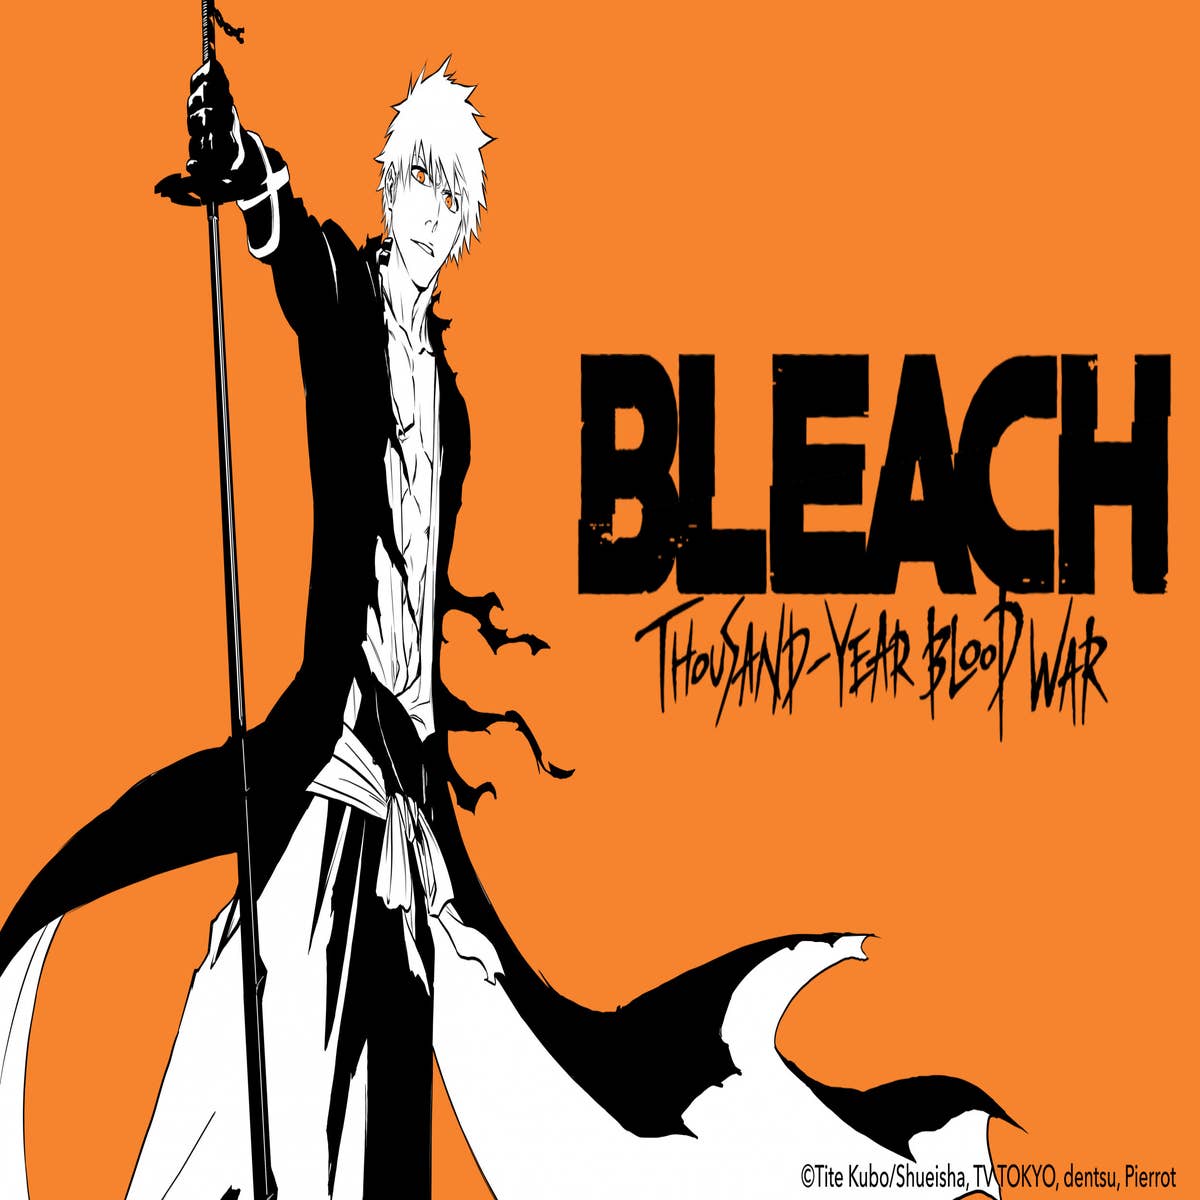 How many seasons does Bleach have? Every season in chronological order